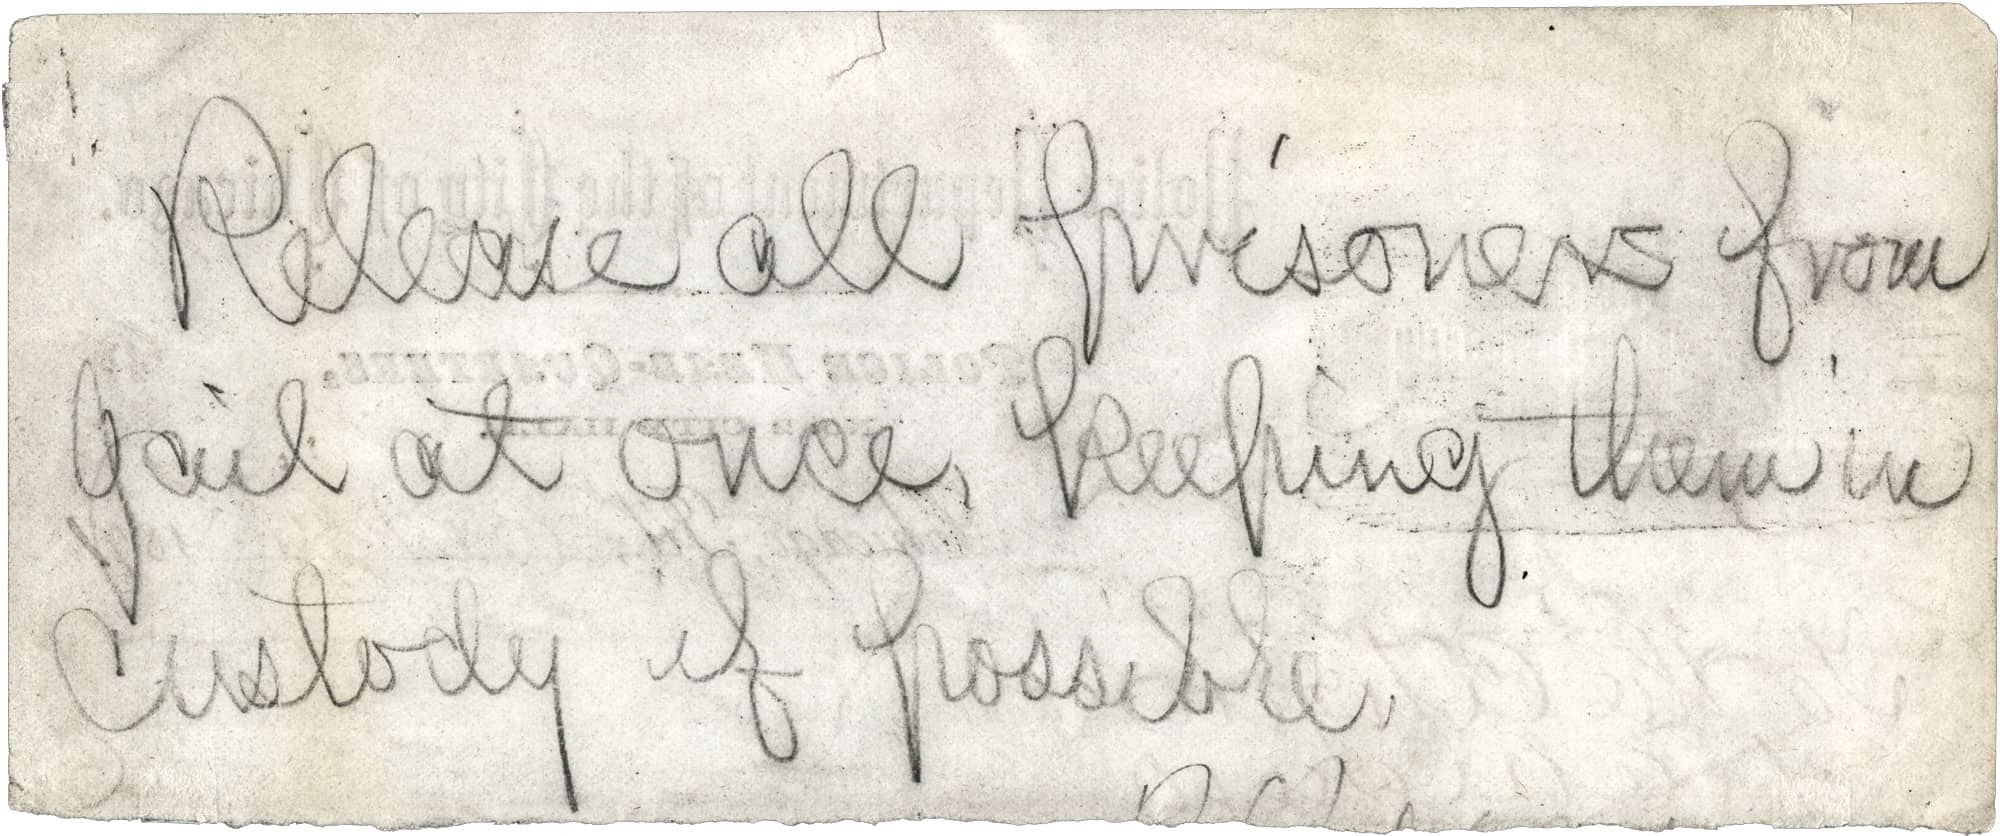 Note from Mayor Mason that reads 'Release all prisoners from jail at once, keeping them in custody if possible.'